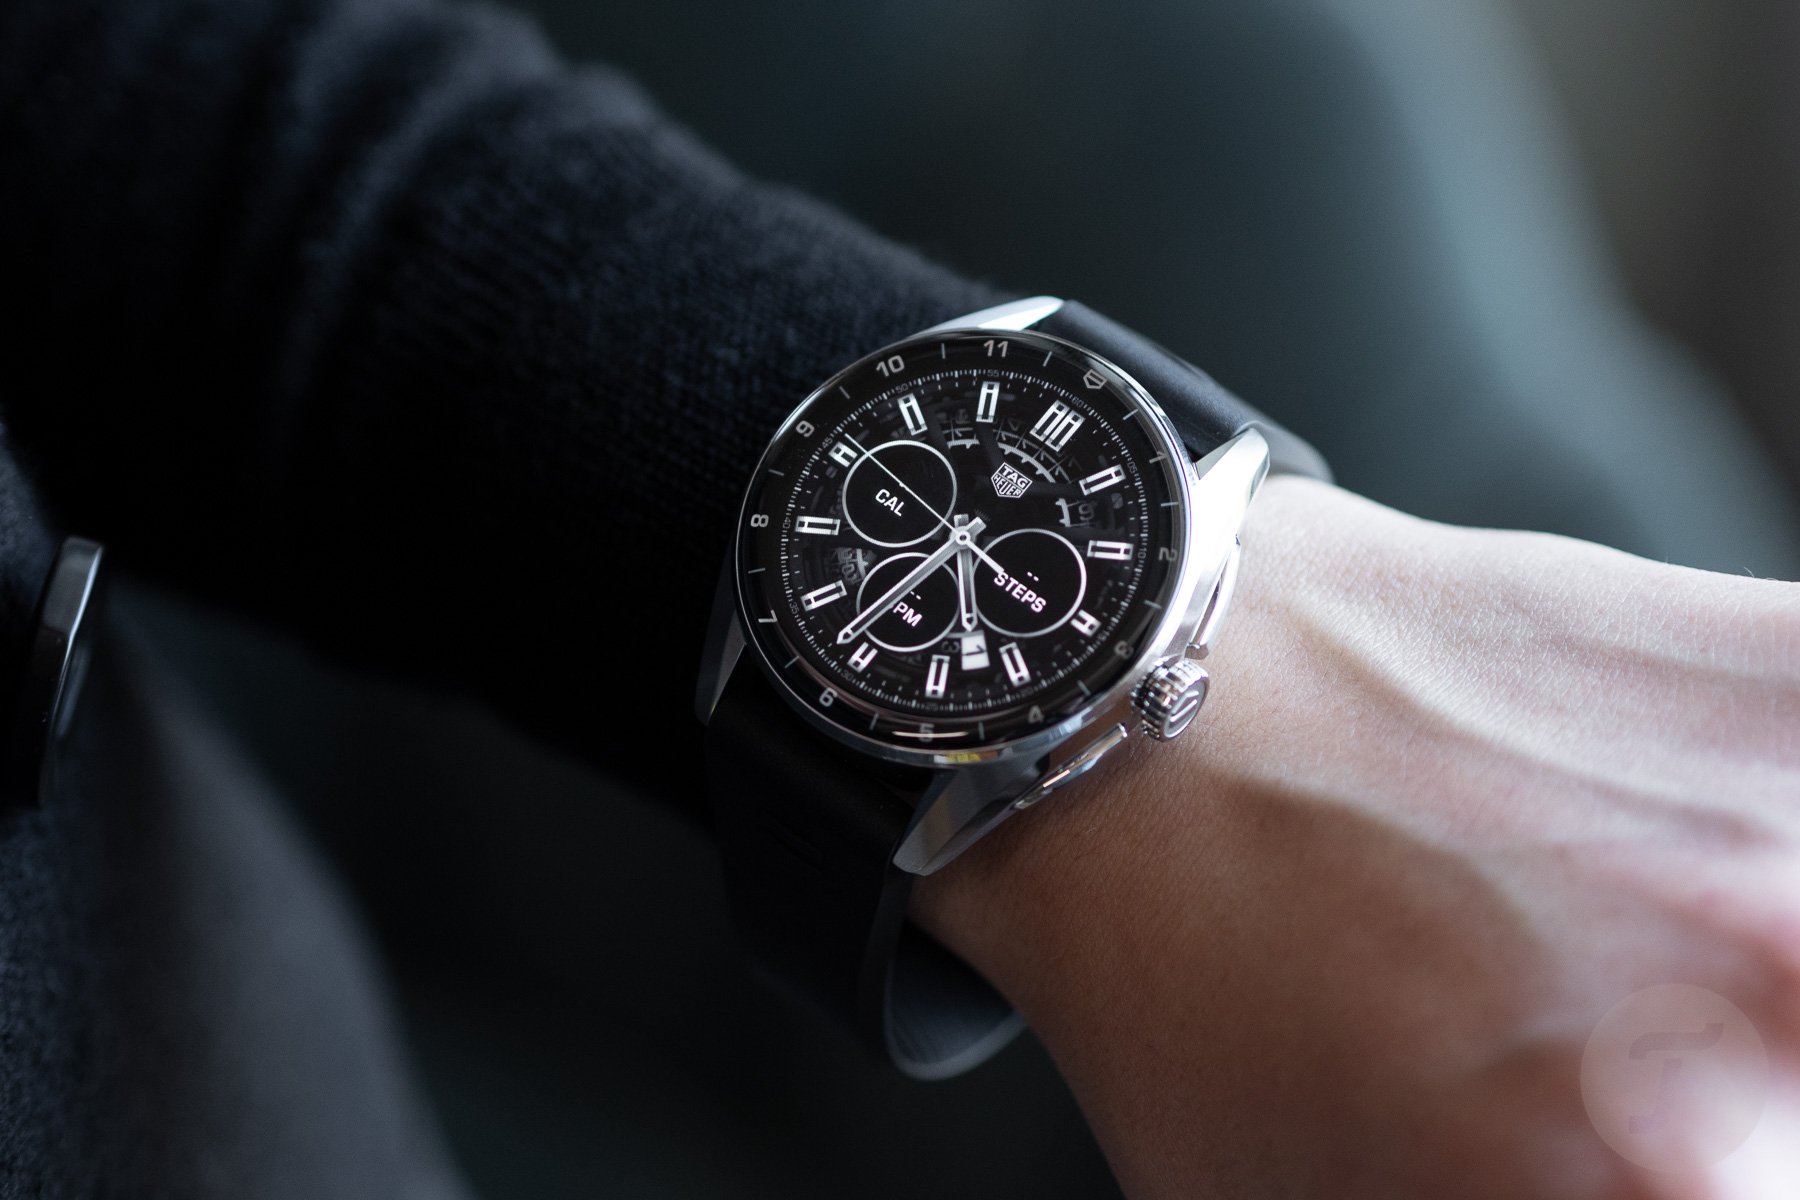 Tag Heuer's new Connected Calibre E4 offers better specs and a sleek,  smaller 42mm model - The Verge